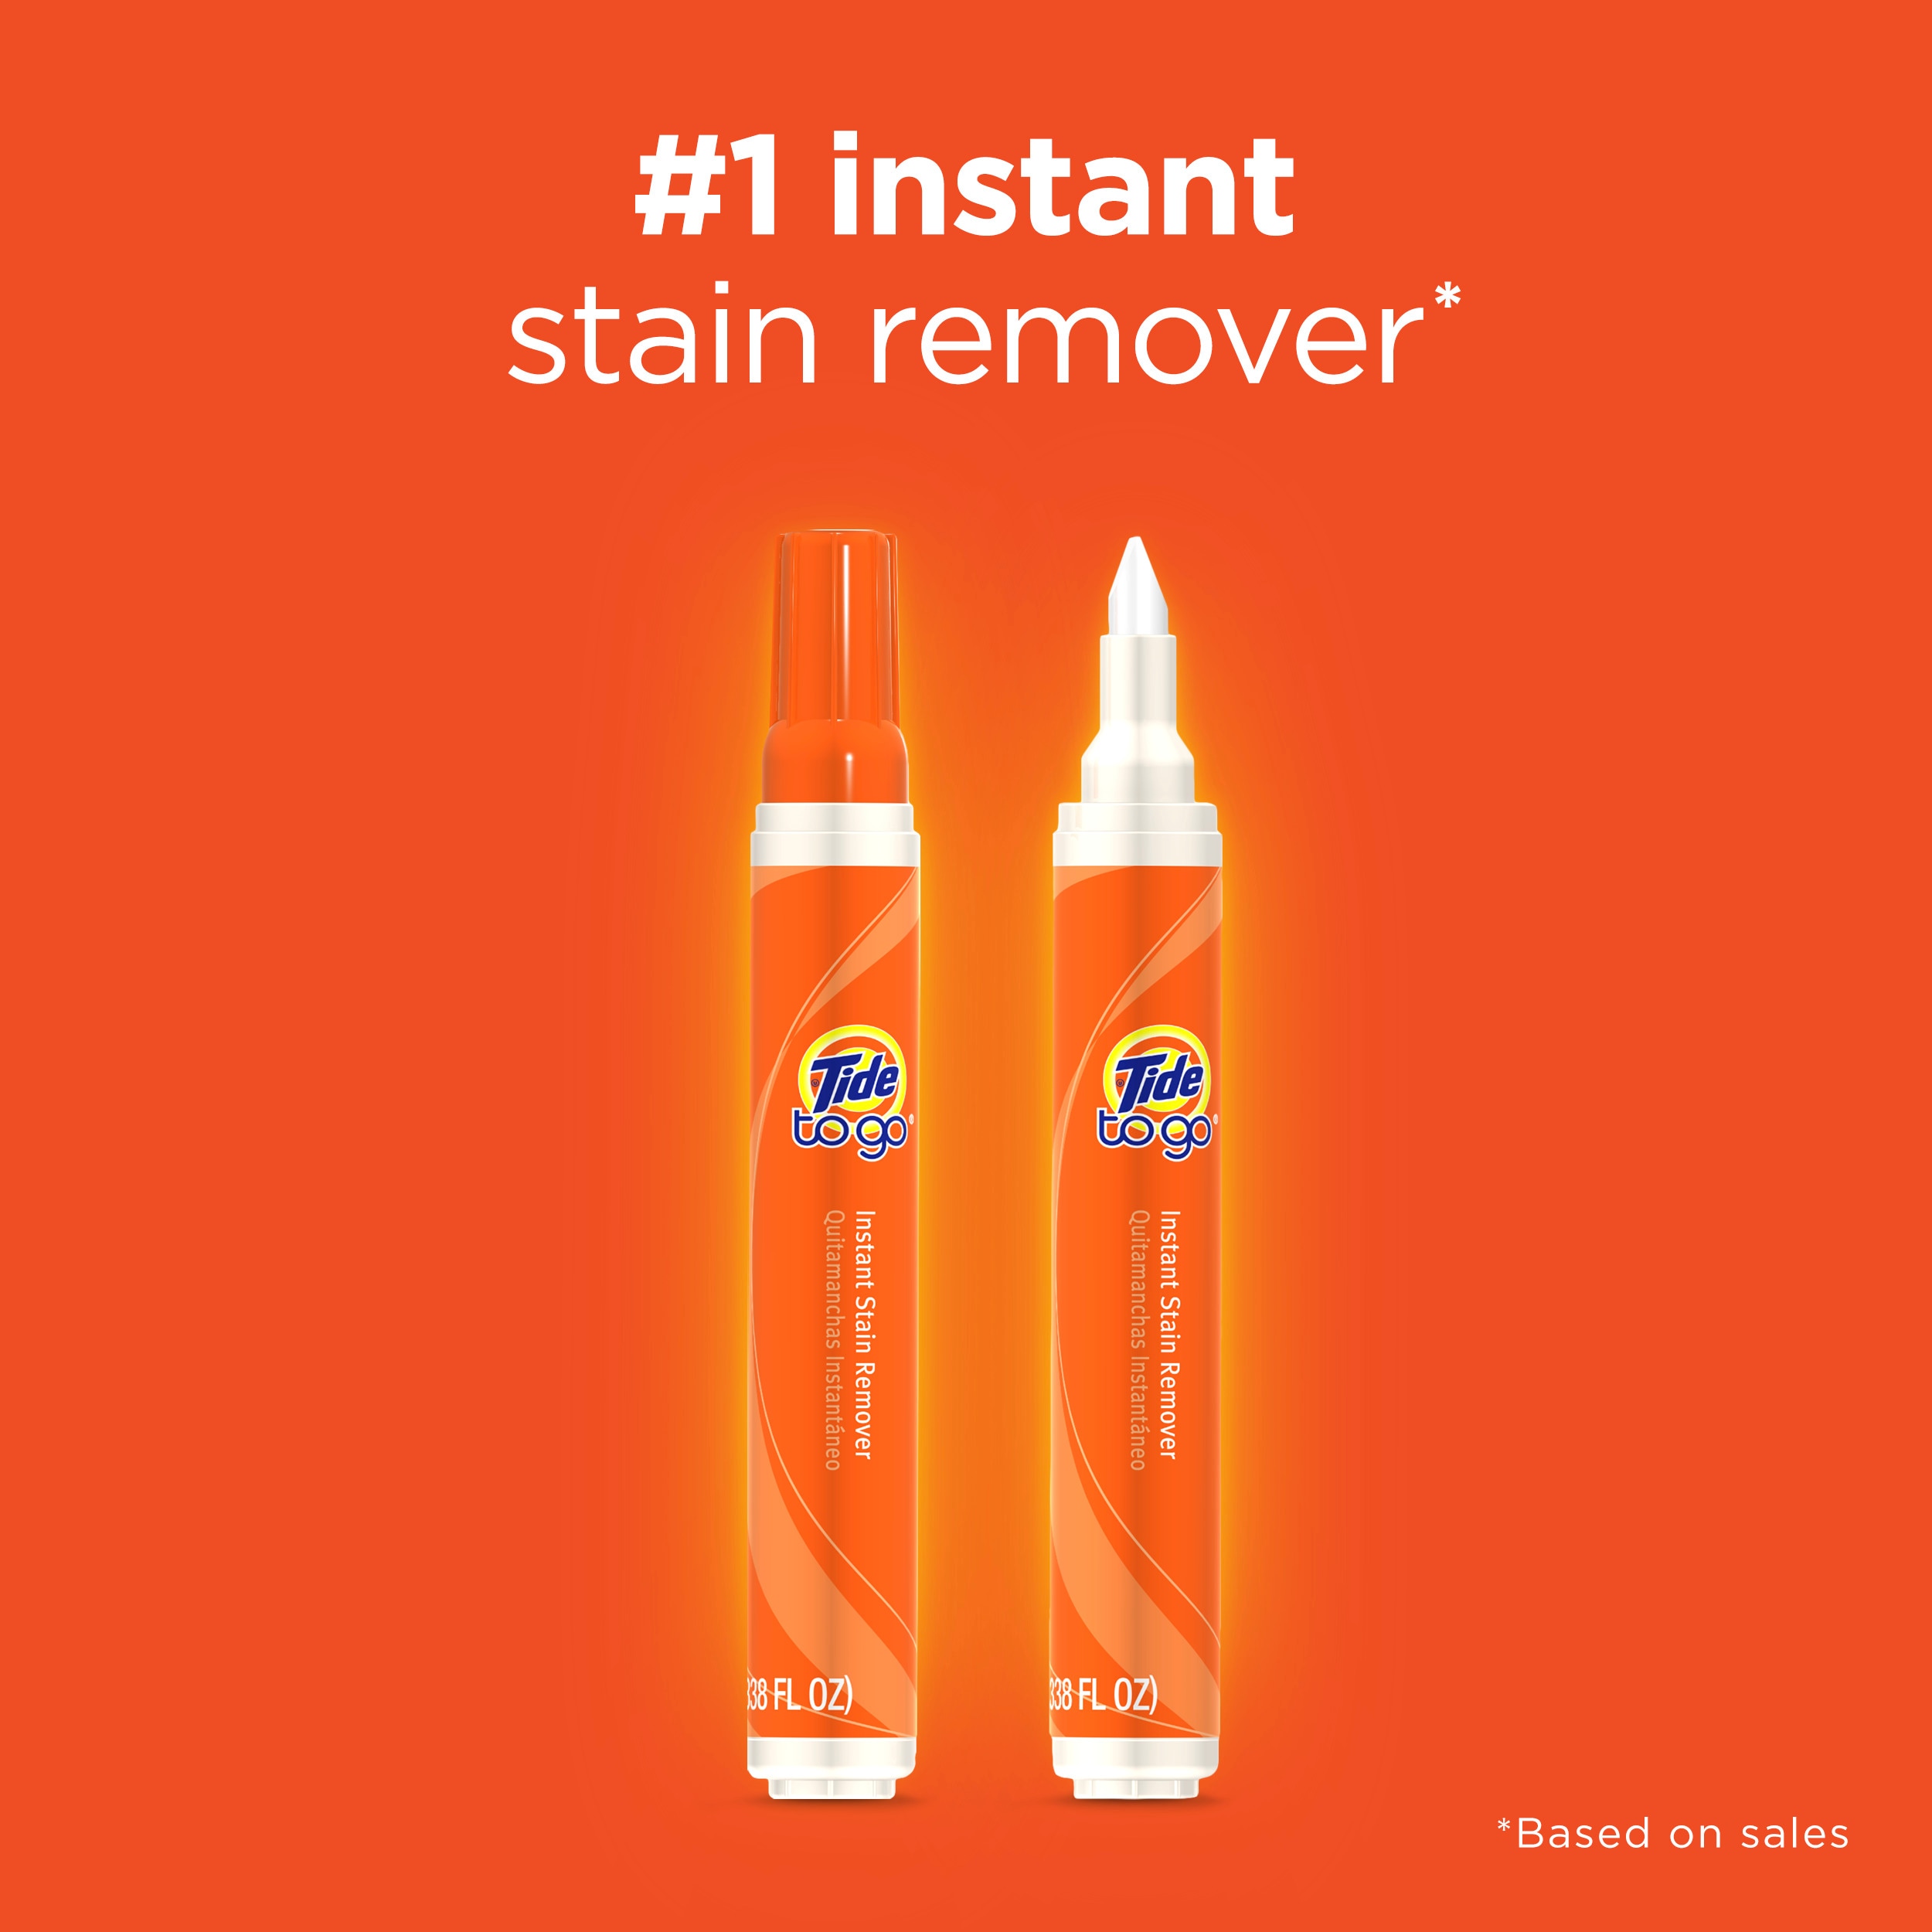 Tide Pens to Go Instant Stain Remover 10ml0.33 fl oz. - Pack of 24